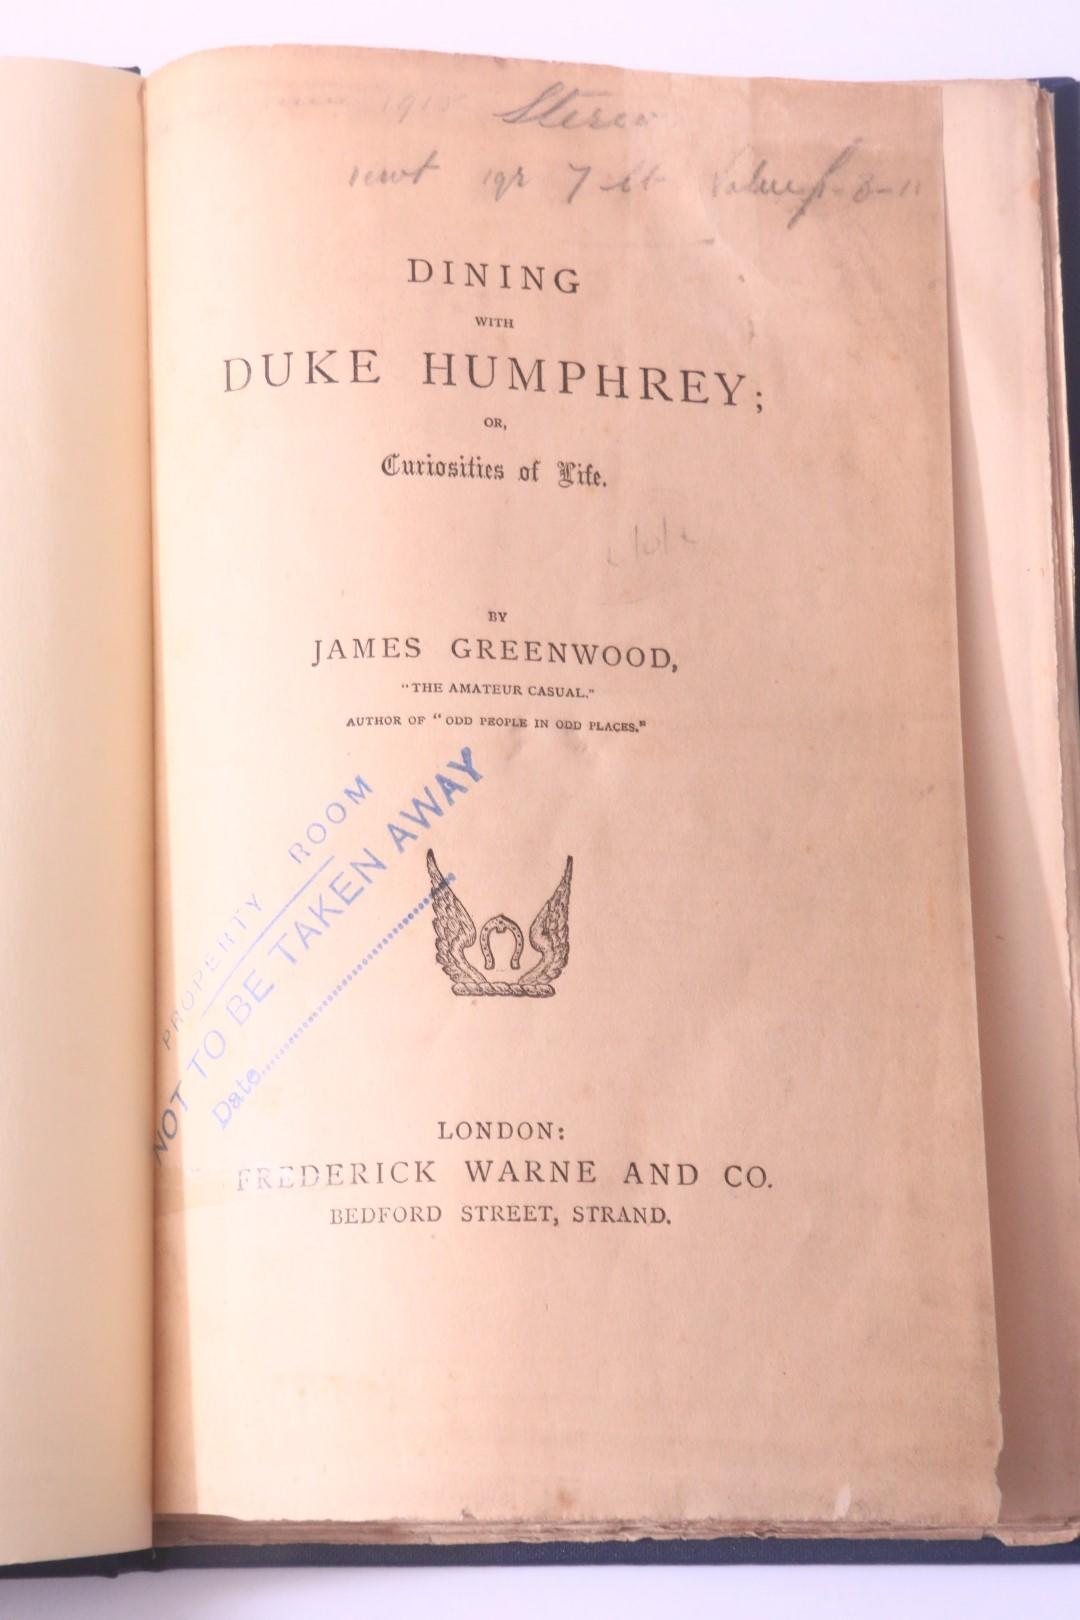 James Greenwood - Dining with Duke Humphrey - Warne, n.d. [1880s?], First Edition.